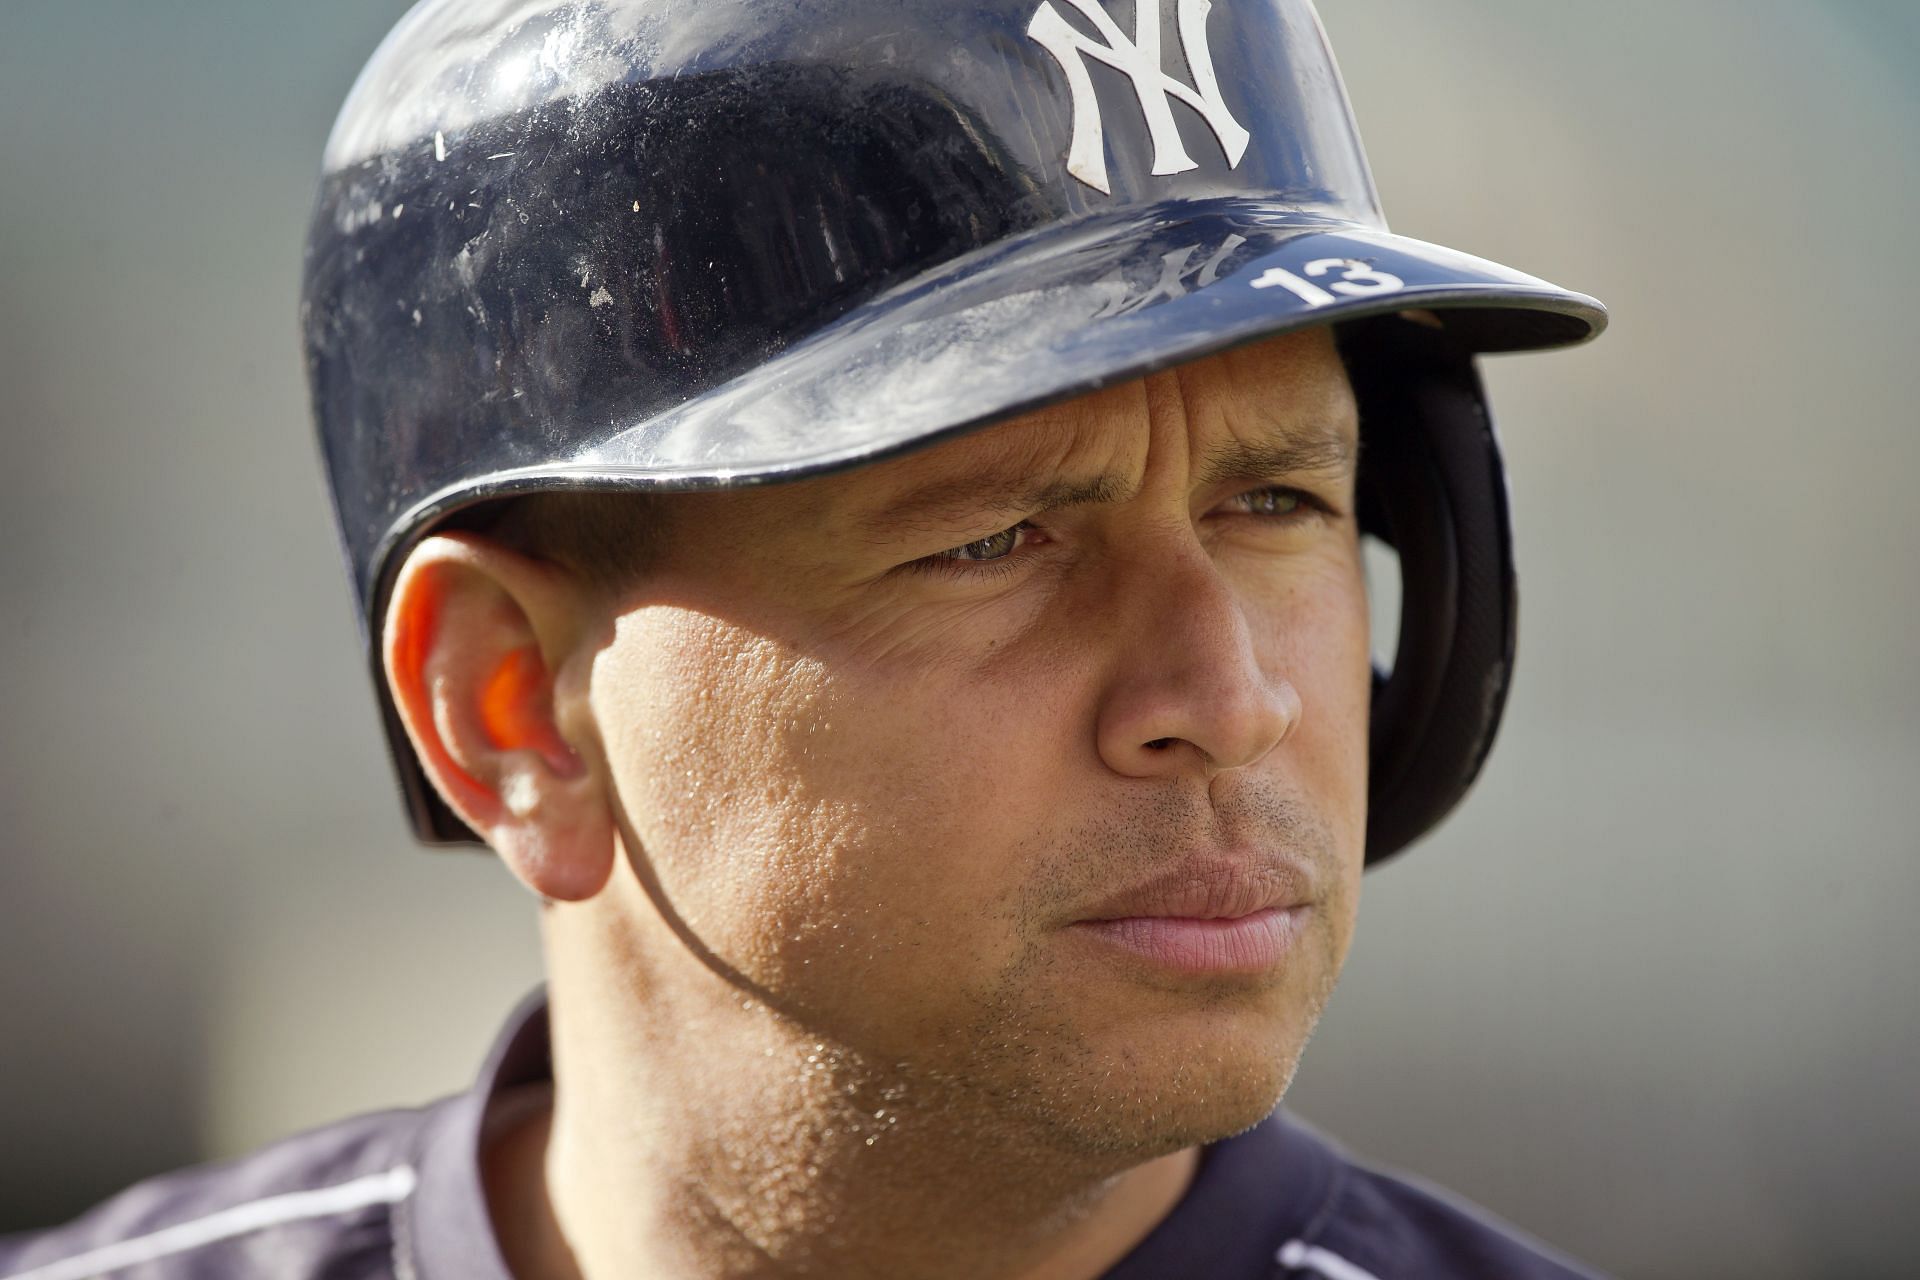 A-Rod gained great success at a very early age